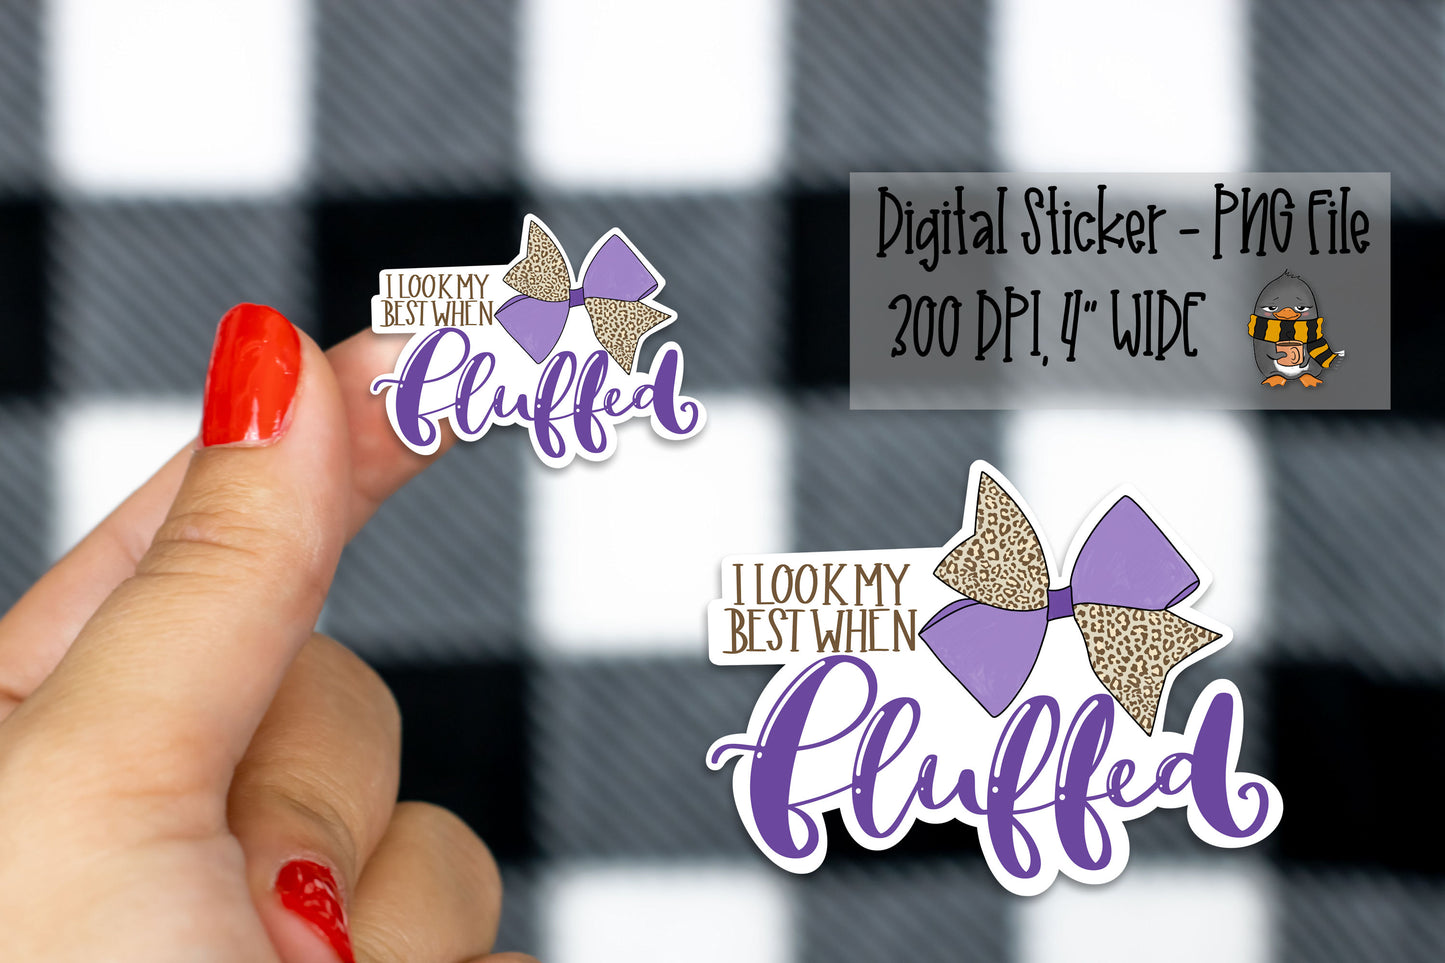 I Look Best When Fluffed | Printable Sticker